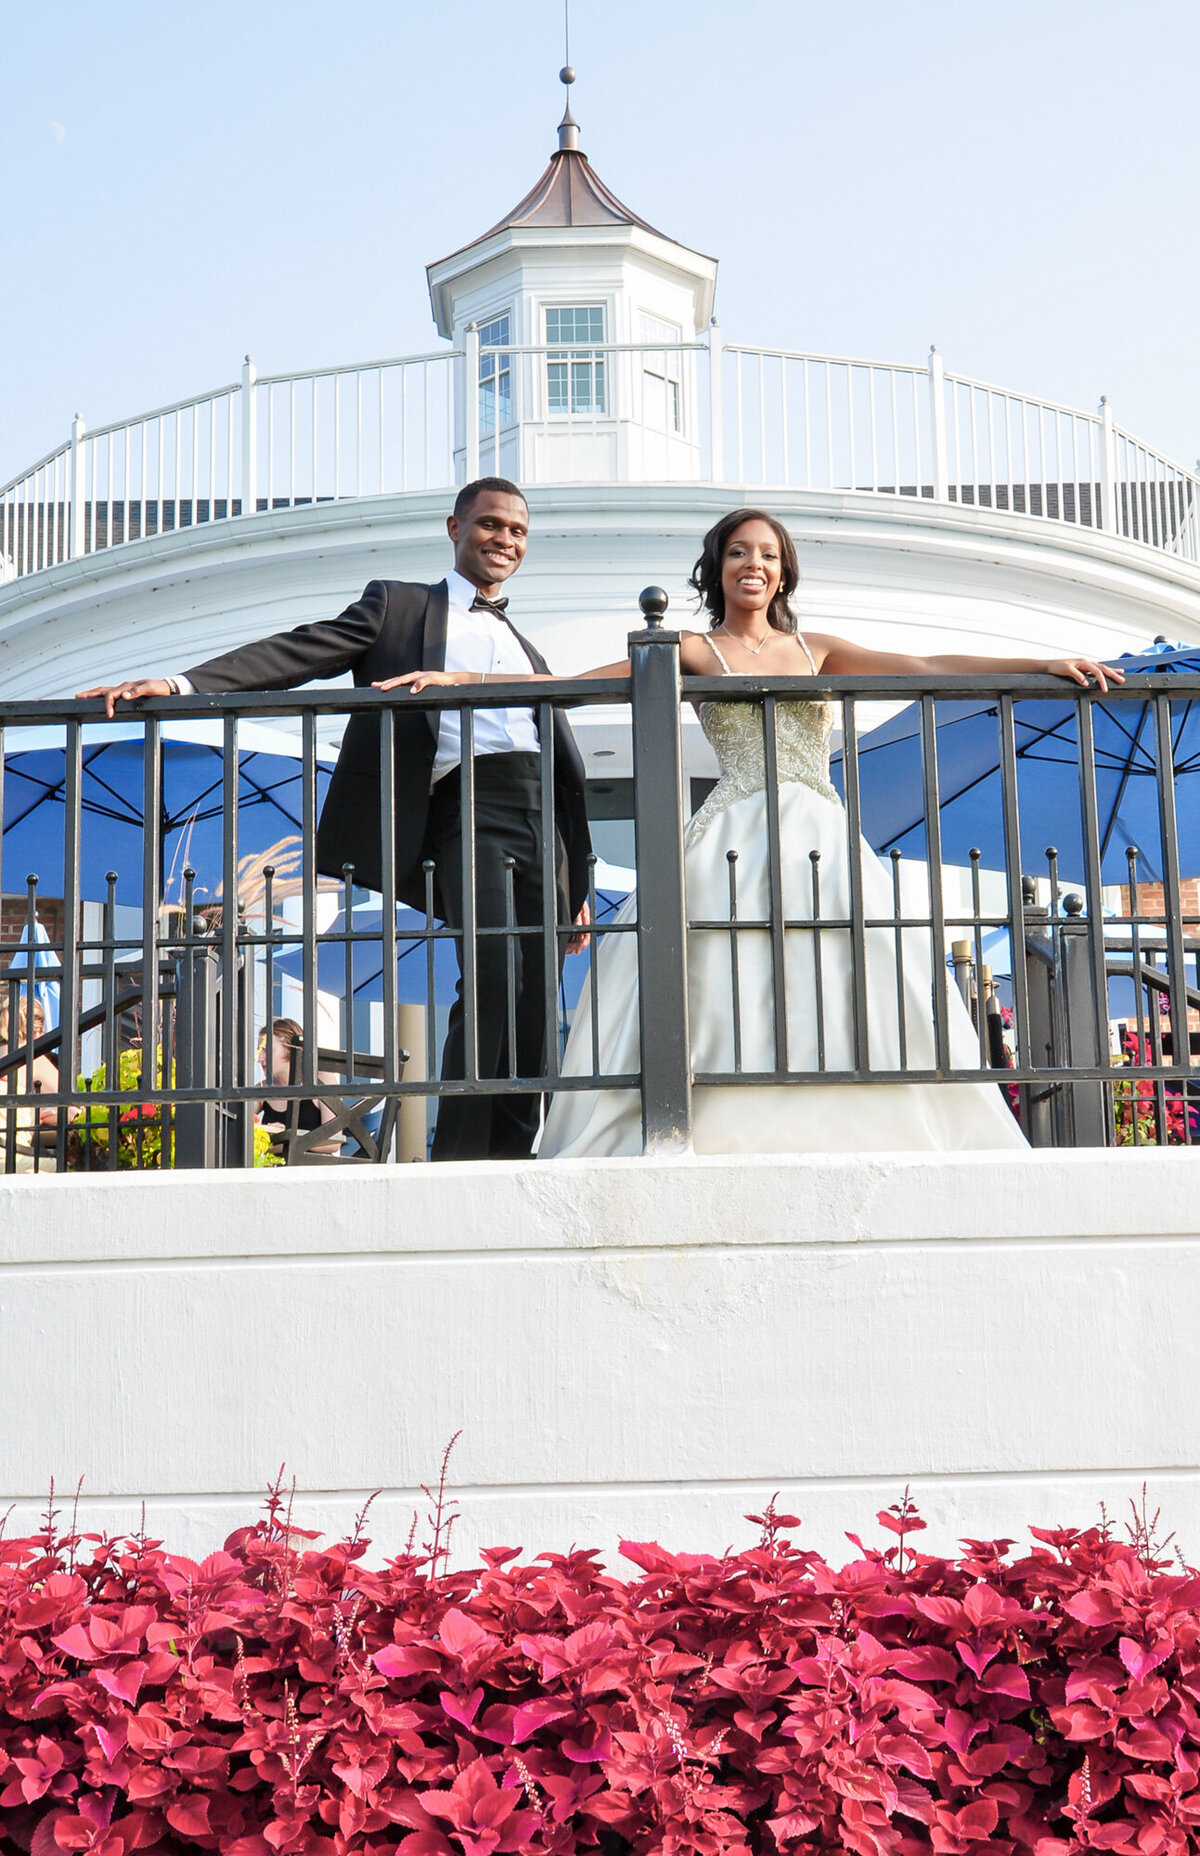 Elegant wedding venue that has beautiful florals and bride and groom standing in the railings